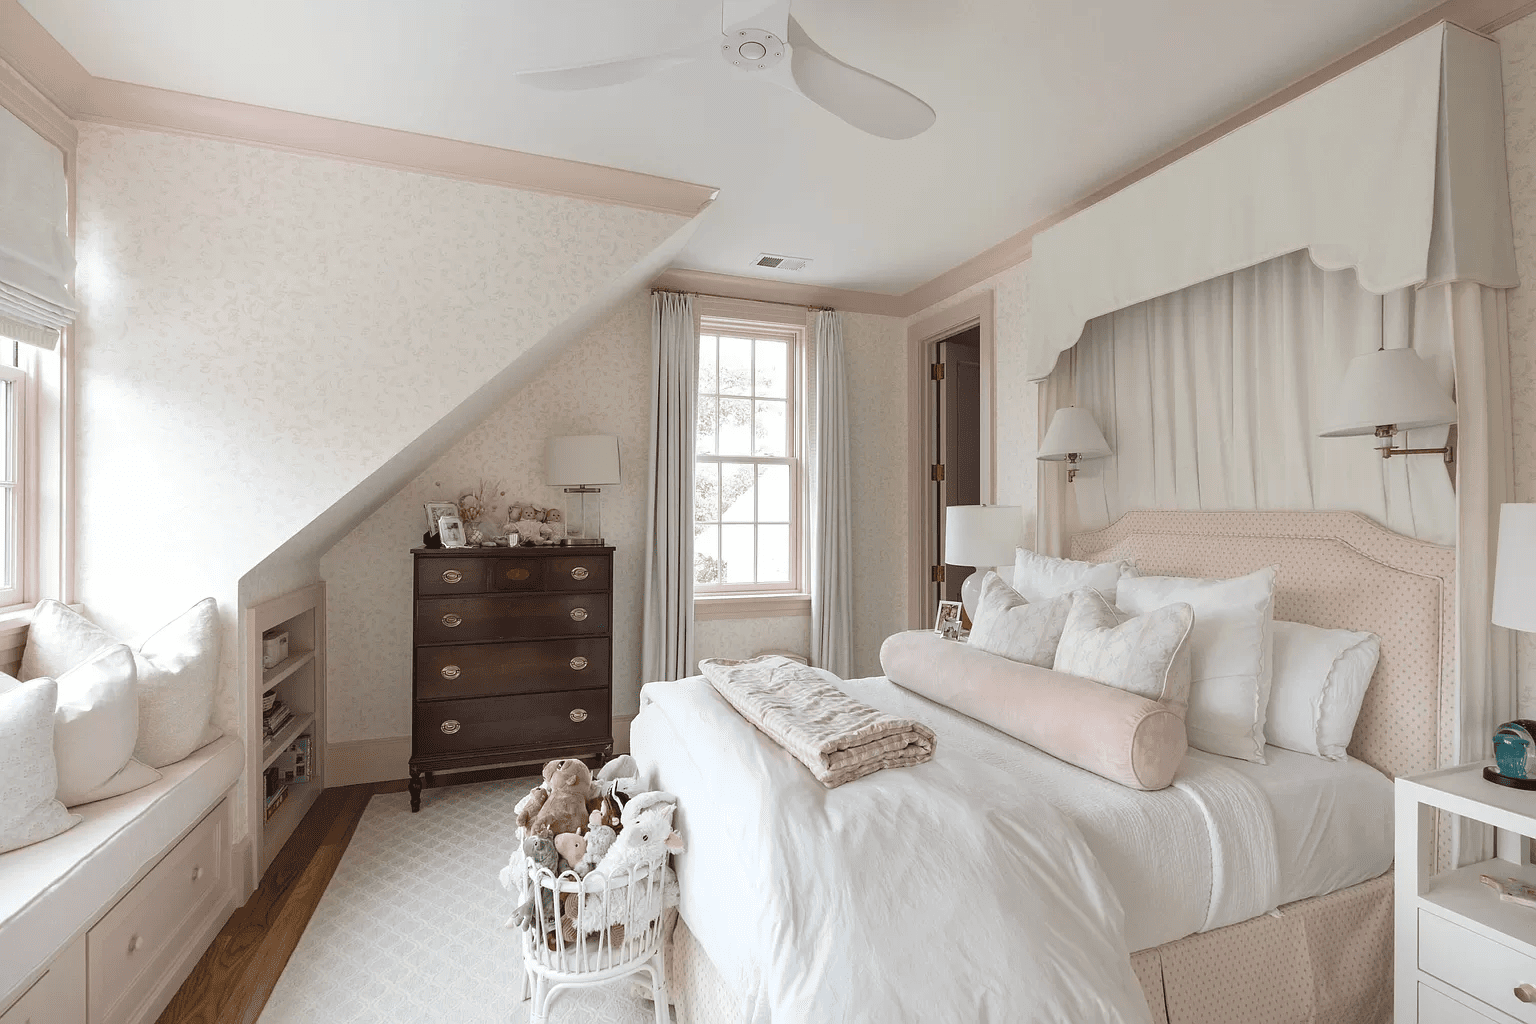 Traditional child's bedroom featured in Charleston Harbor home tour